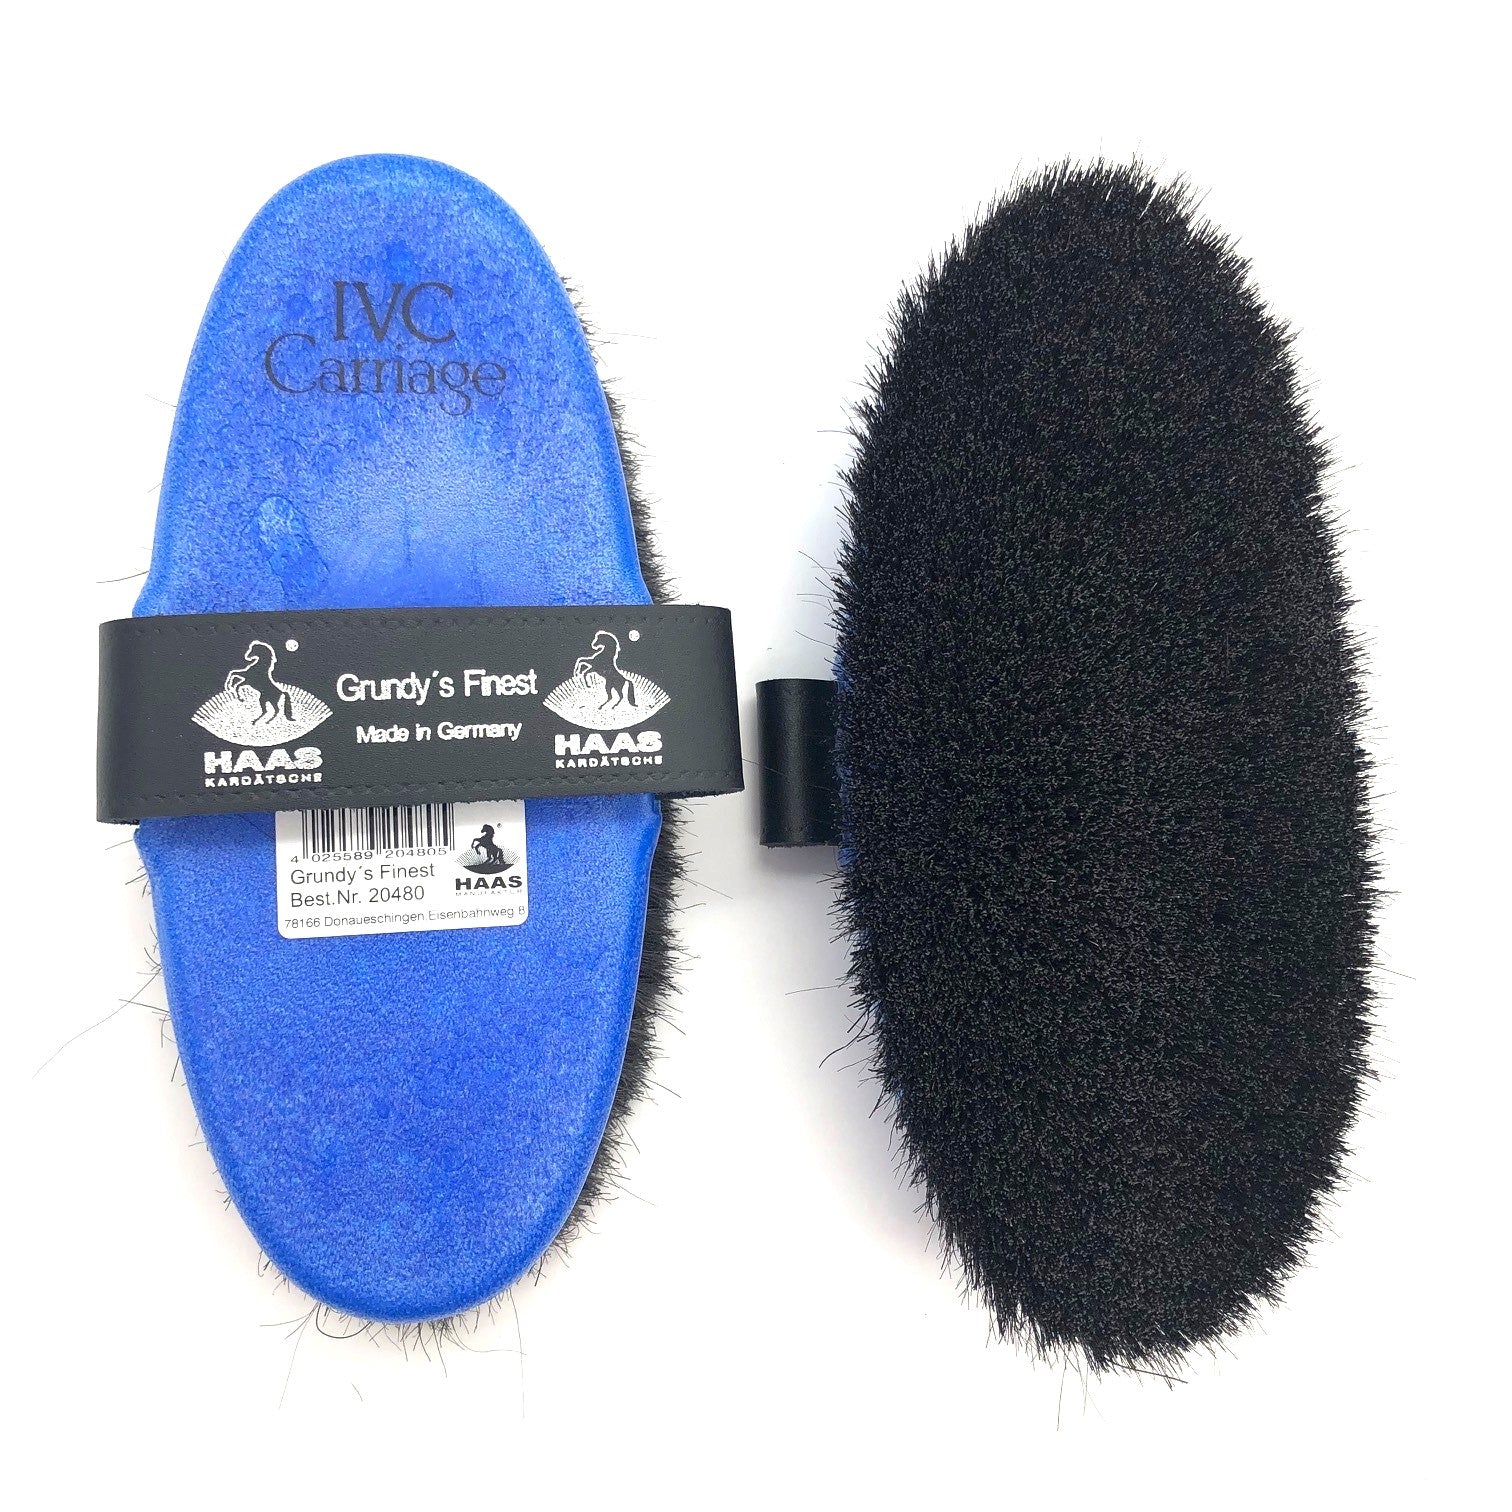 Haas Grundy's Finest Soft Horse Brush | IVC Carriage